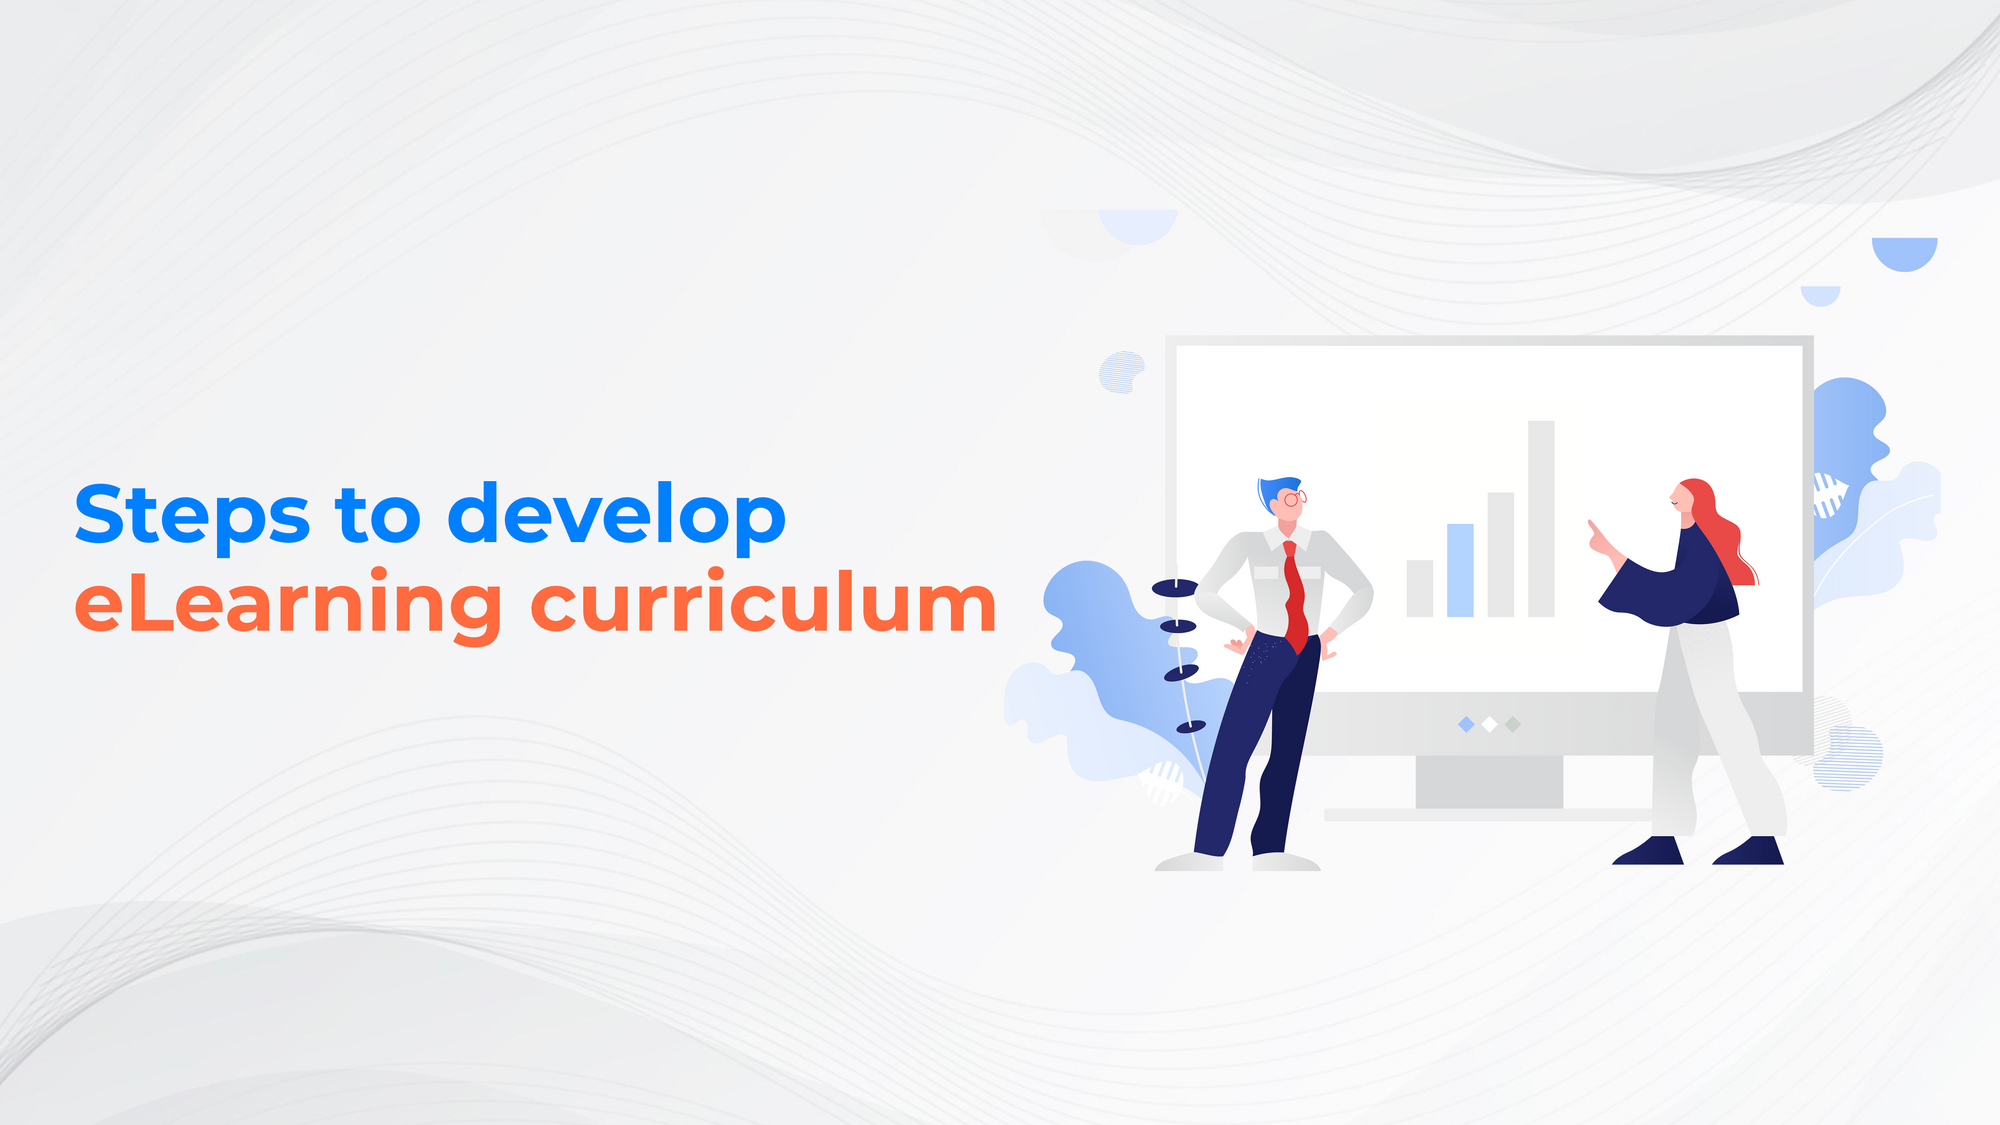 Steps to develop eLearning curriculum